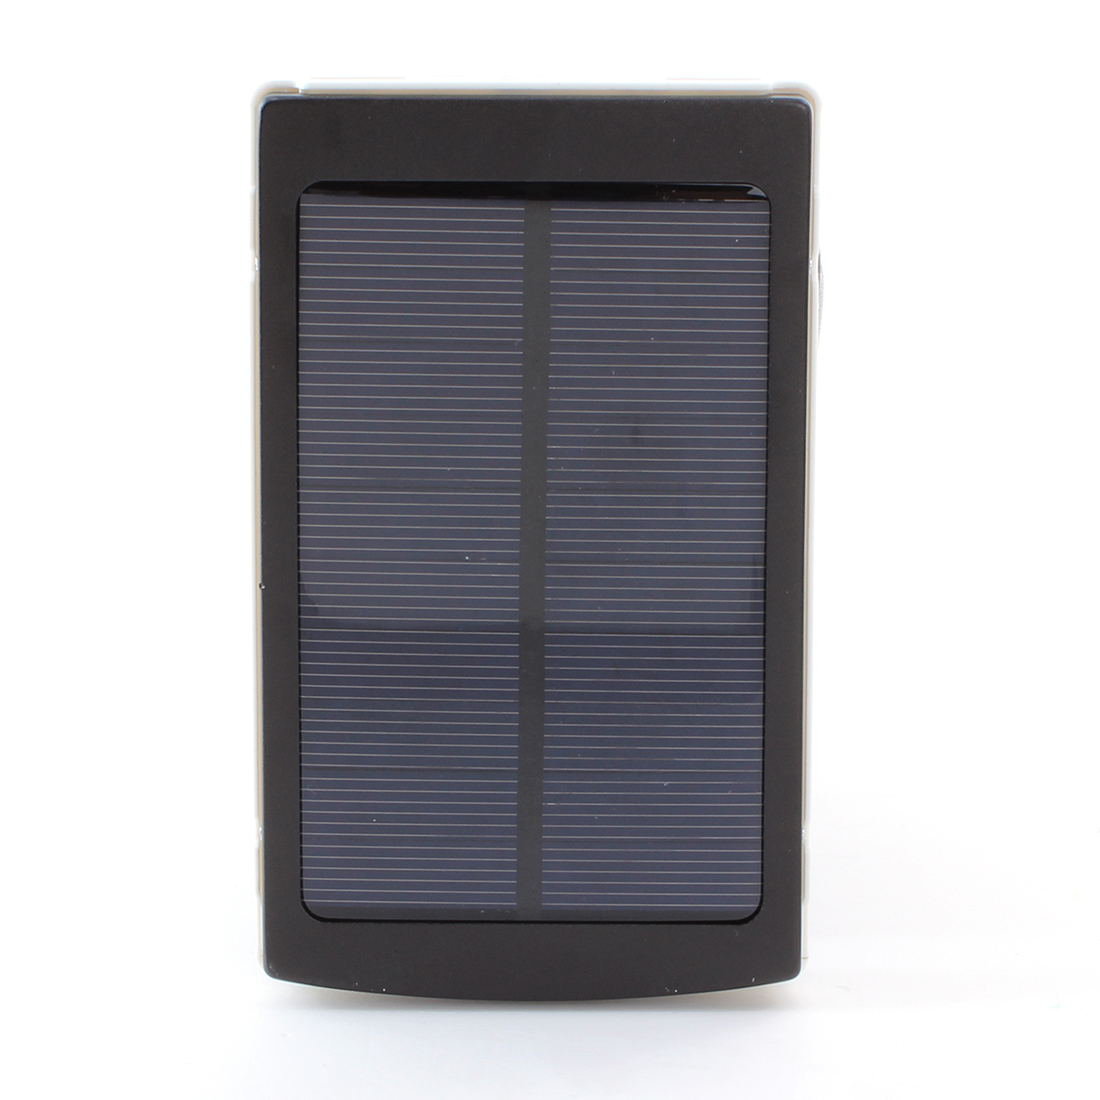 Solar-Charger-Mobile-Phone-Cell-Phone-Power-Bank-Charger-for-Camping-Hiking-Travel-955194-1